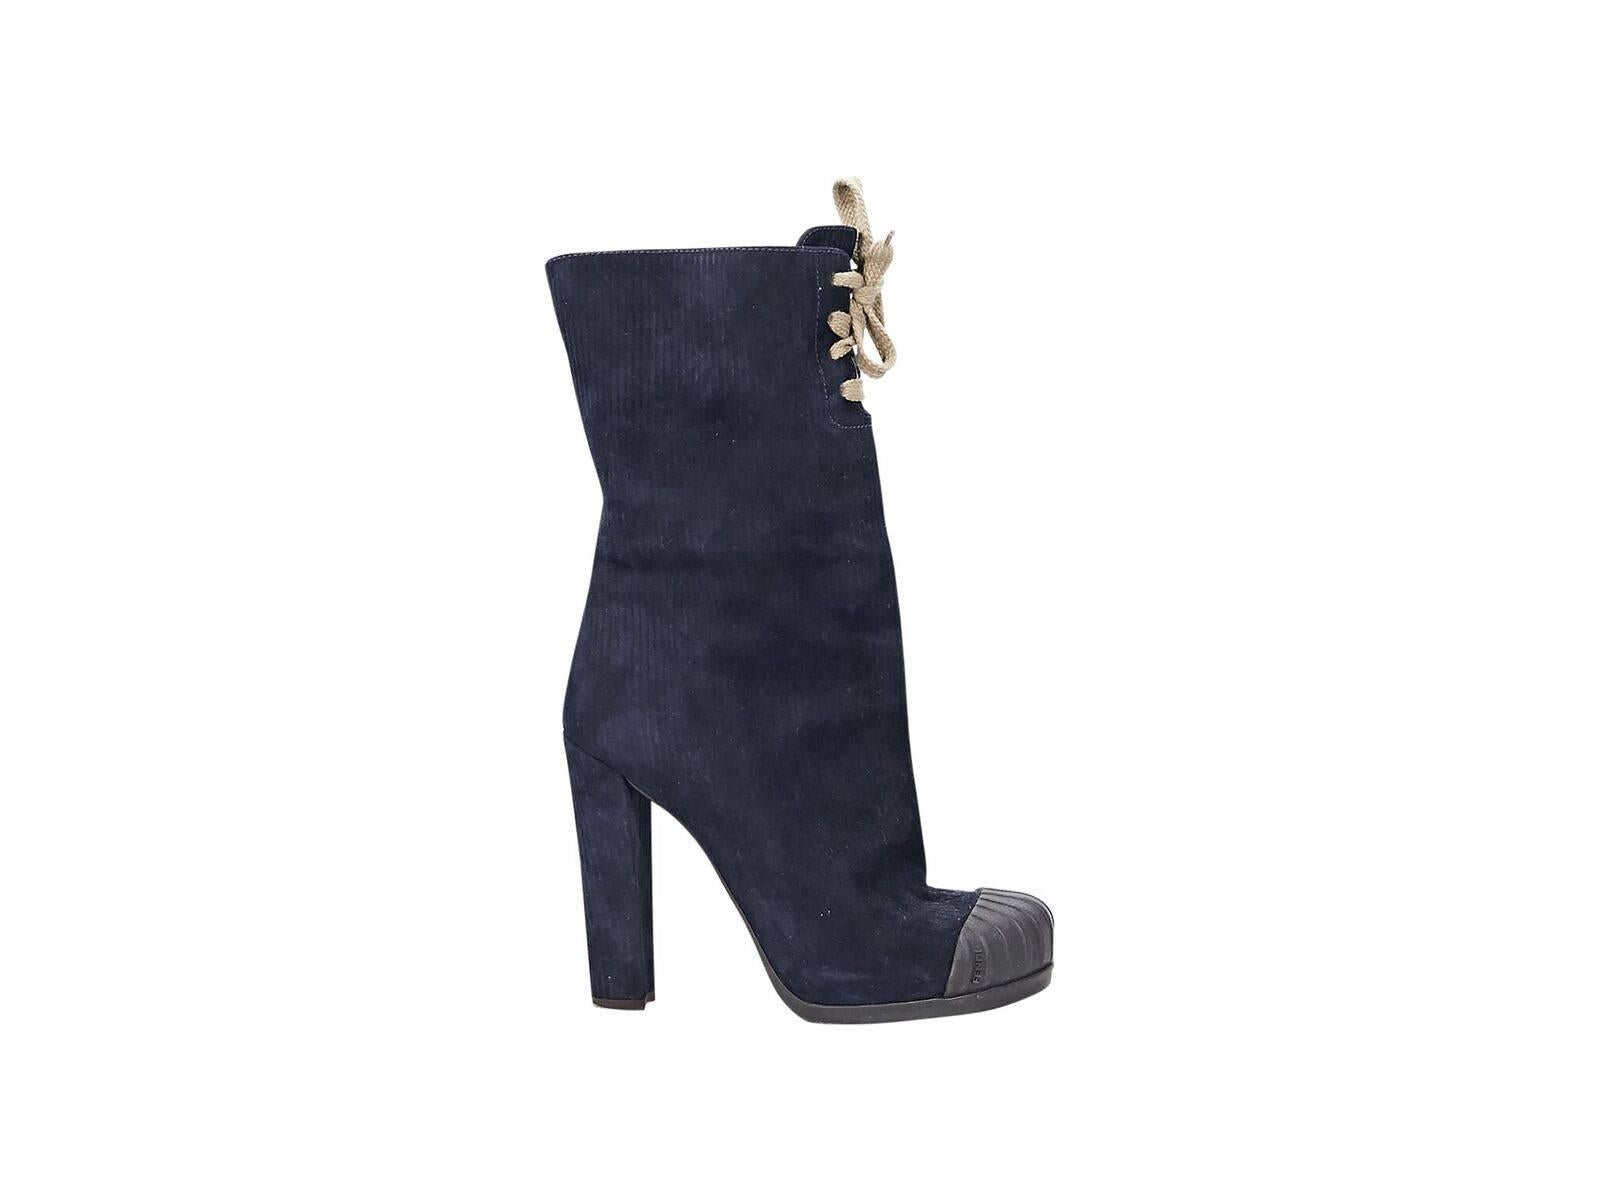 Product details:  Navy blue corduroy mid-calf boots by Fendi.  Rubber cap toe.  Lace-up closure.  
Condition: Pre-owned. Very good.
Est. Retail $528